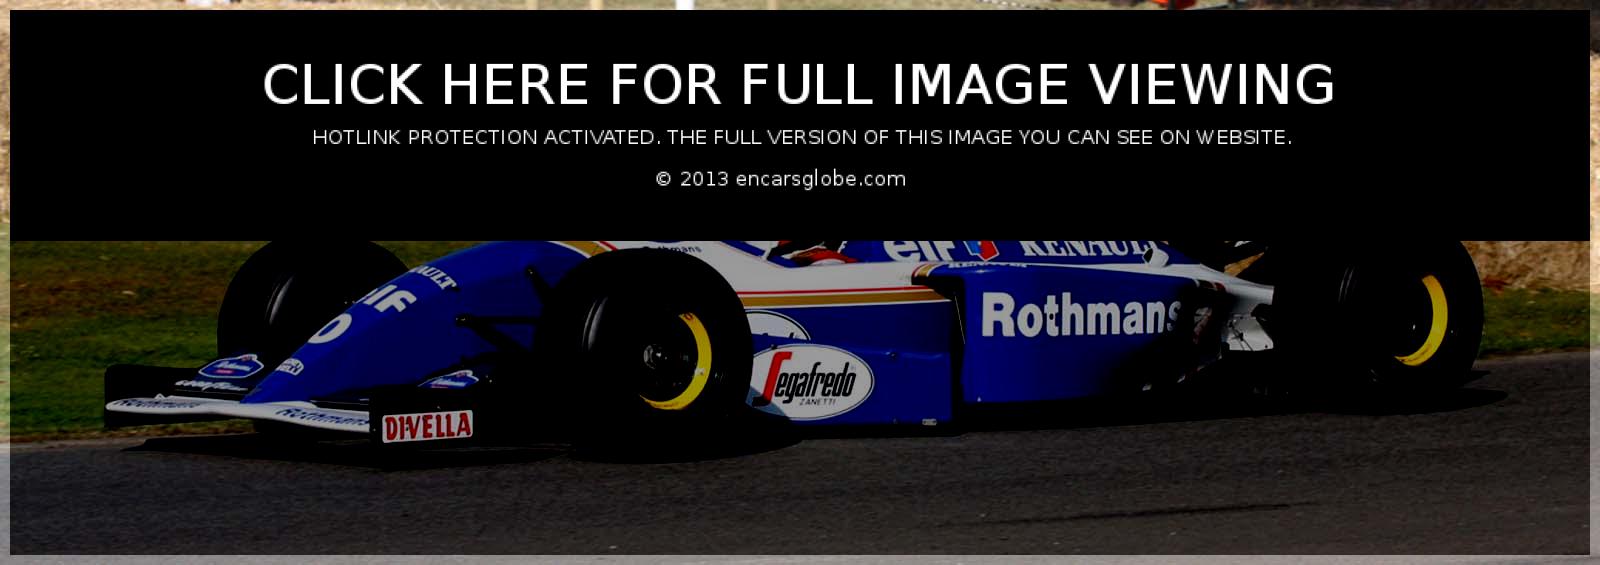 Williams FW16 B Photo Gallery: Photo #04 out of 11, Image Size ...